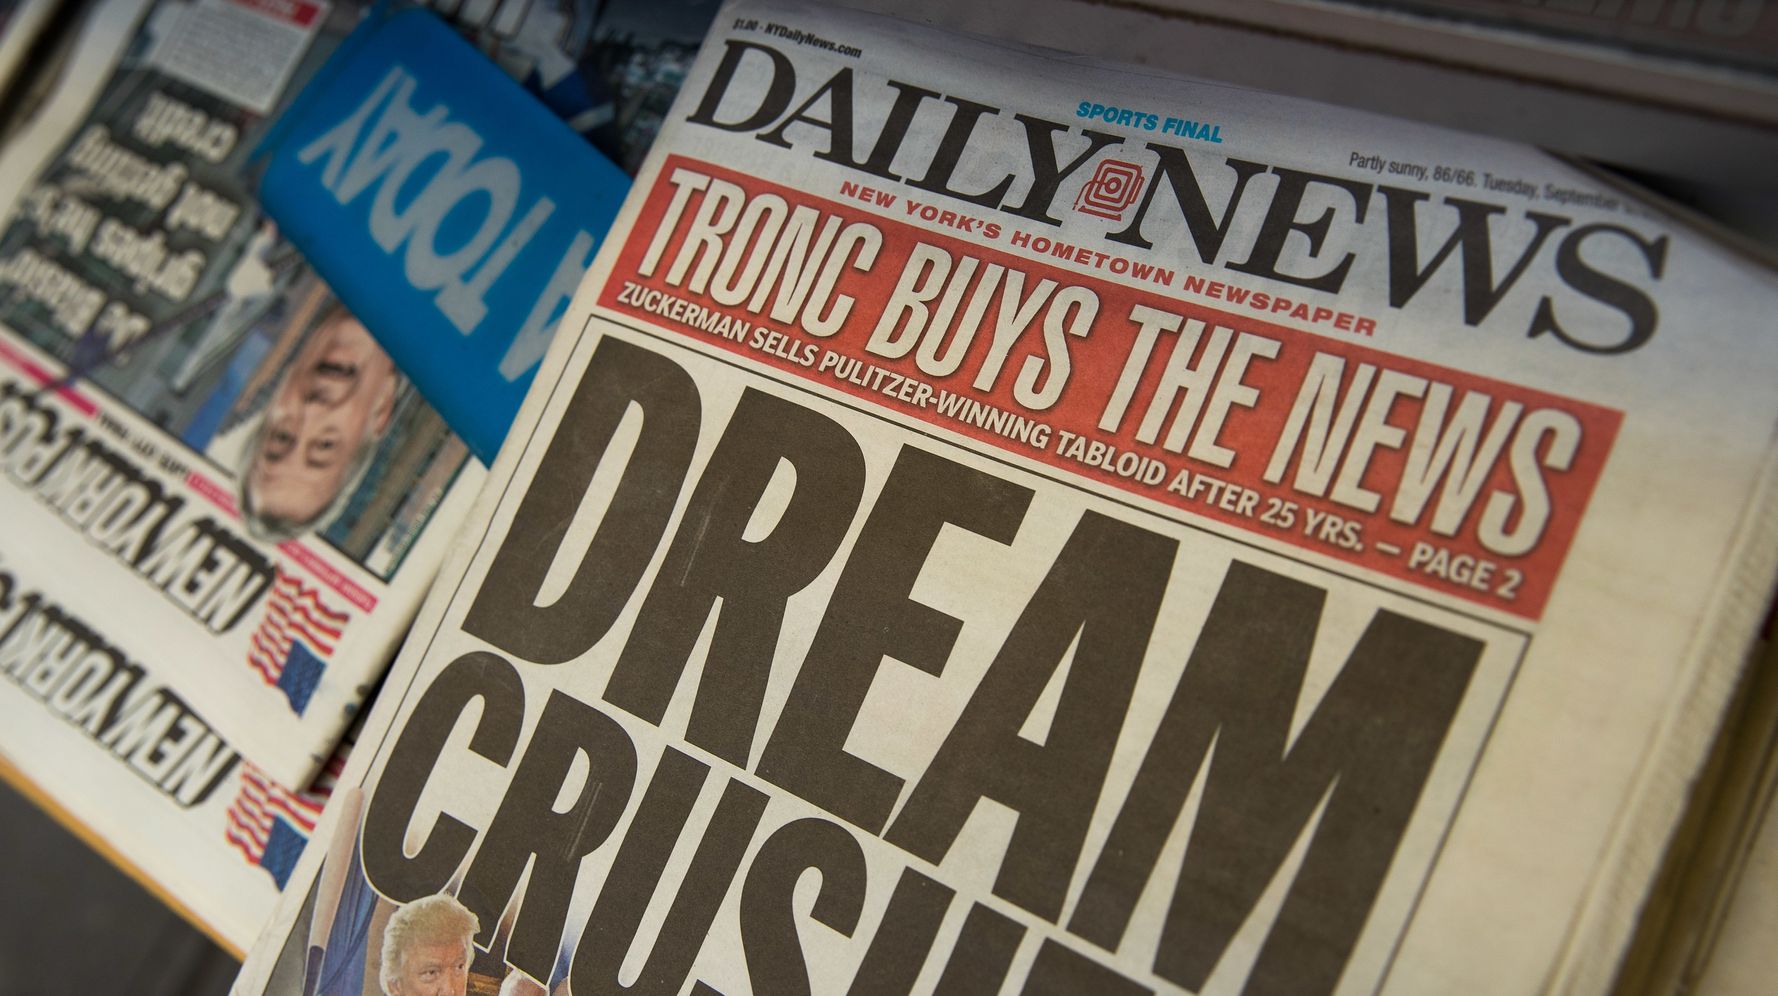 New York Daily News,Newspapers,Layoffs,tronc.